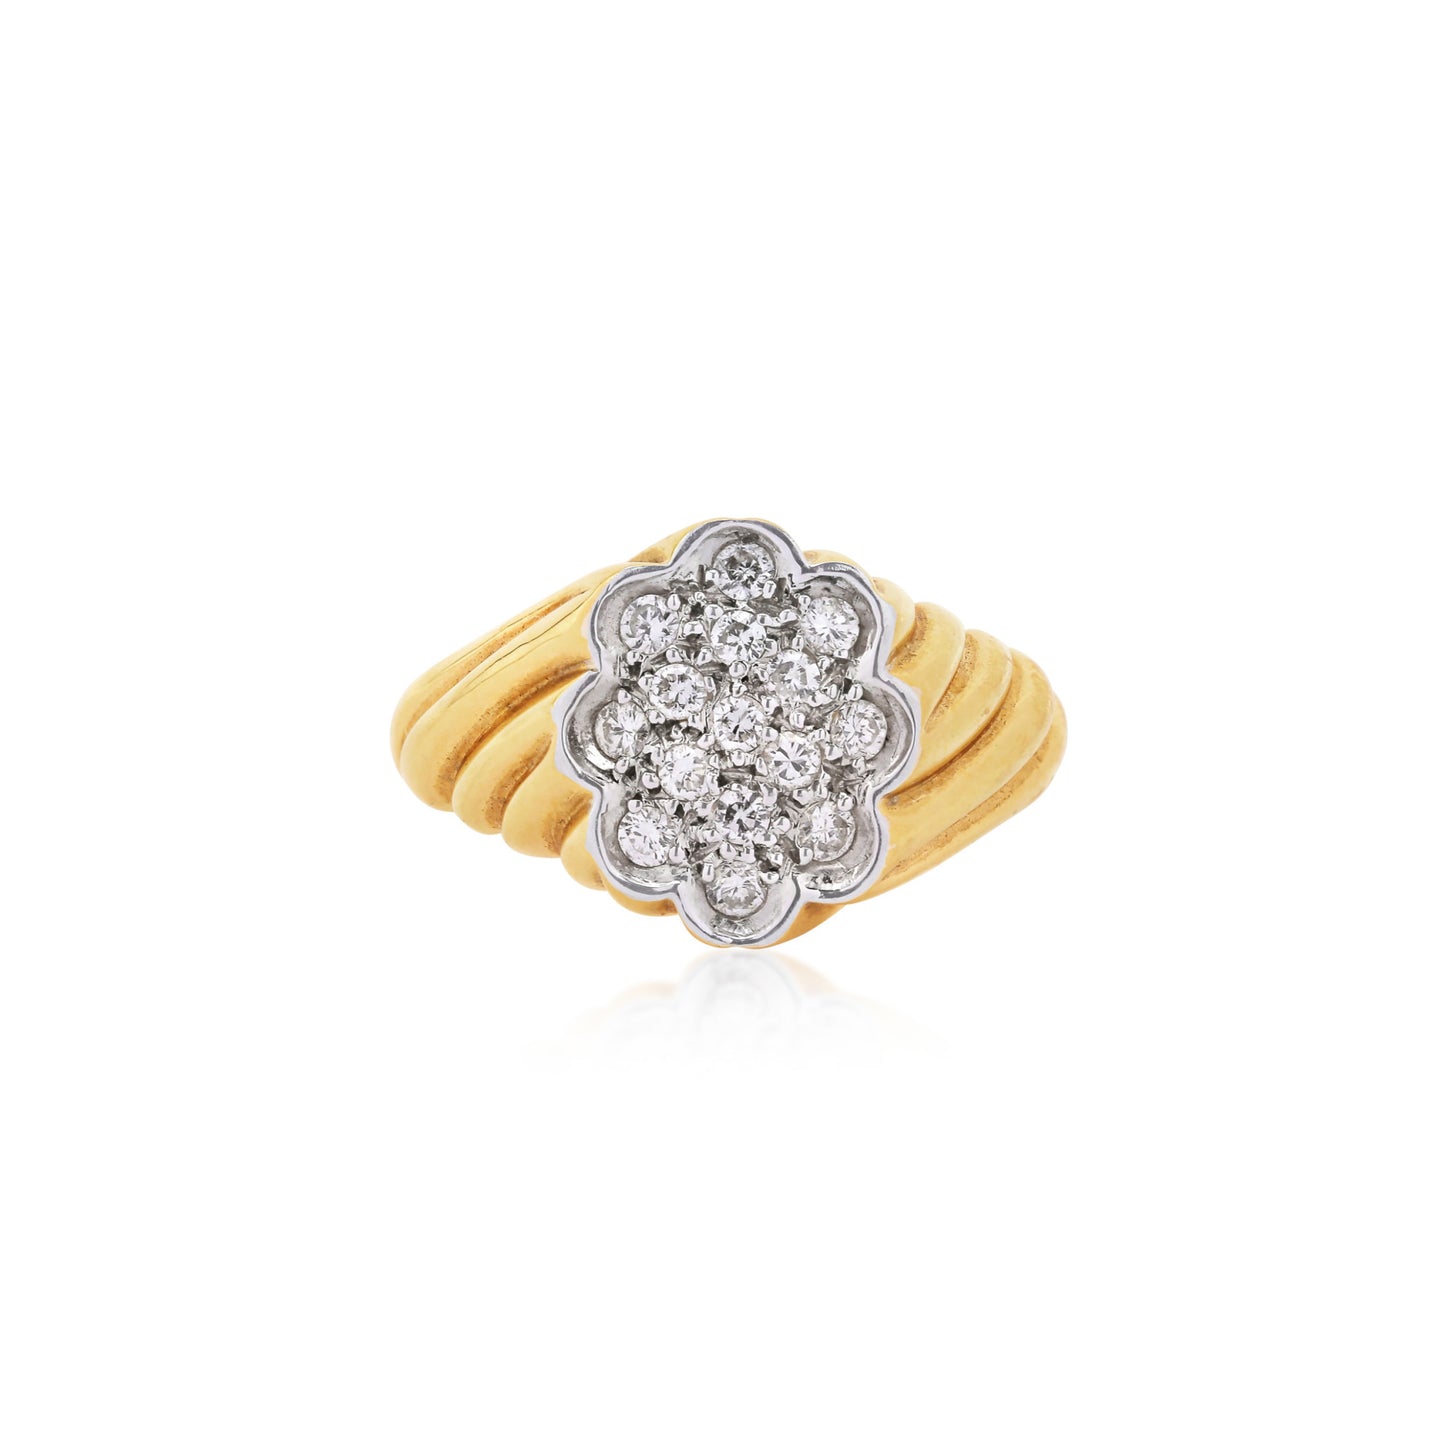 1970s 14KT Yellow Gold Diamond Ring front